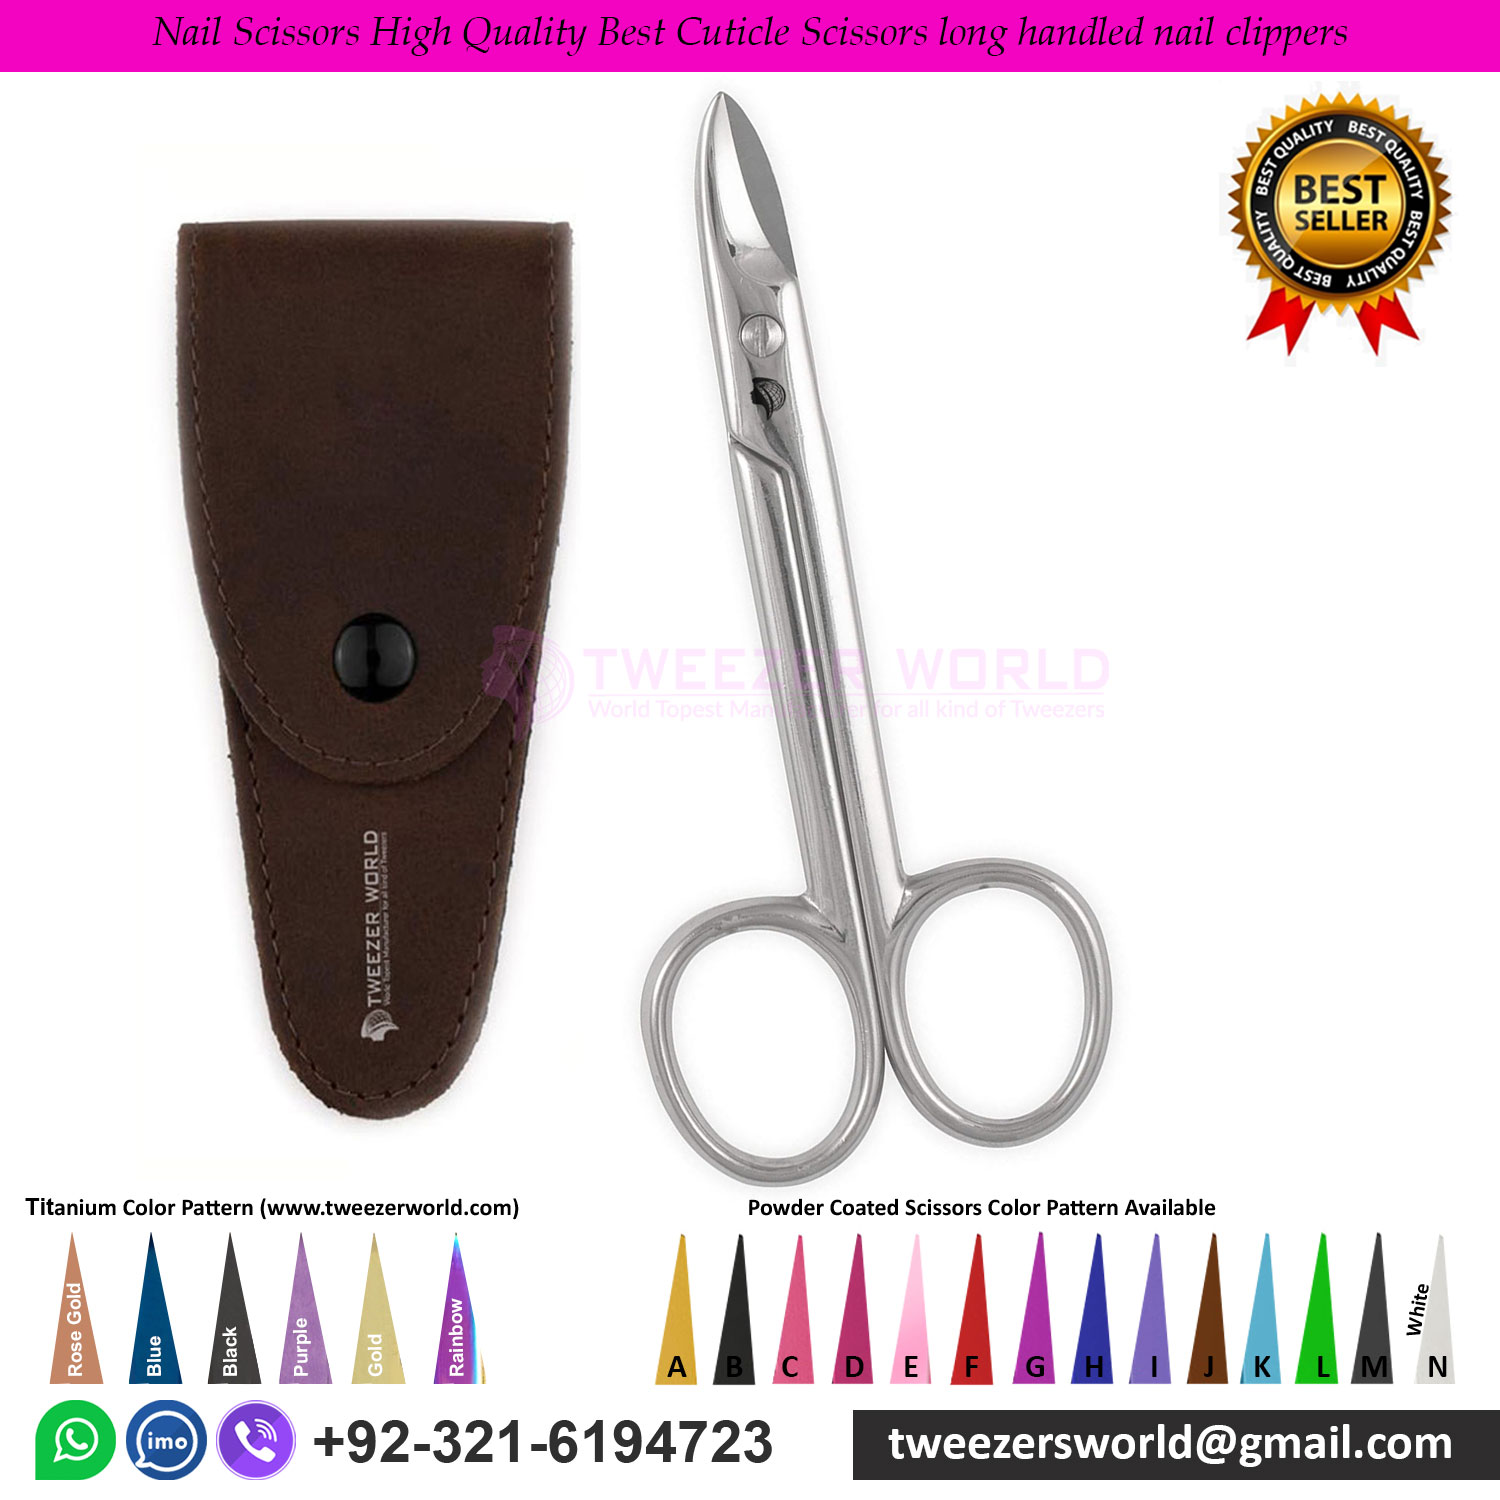 Nail Scissors High Quality Best Cuticle Scissors long handled nail clippers